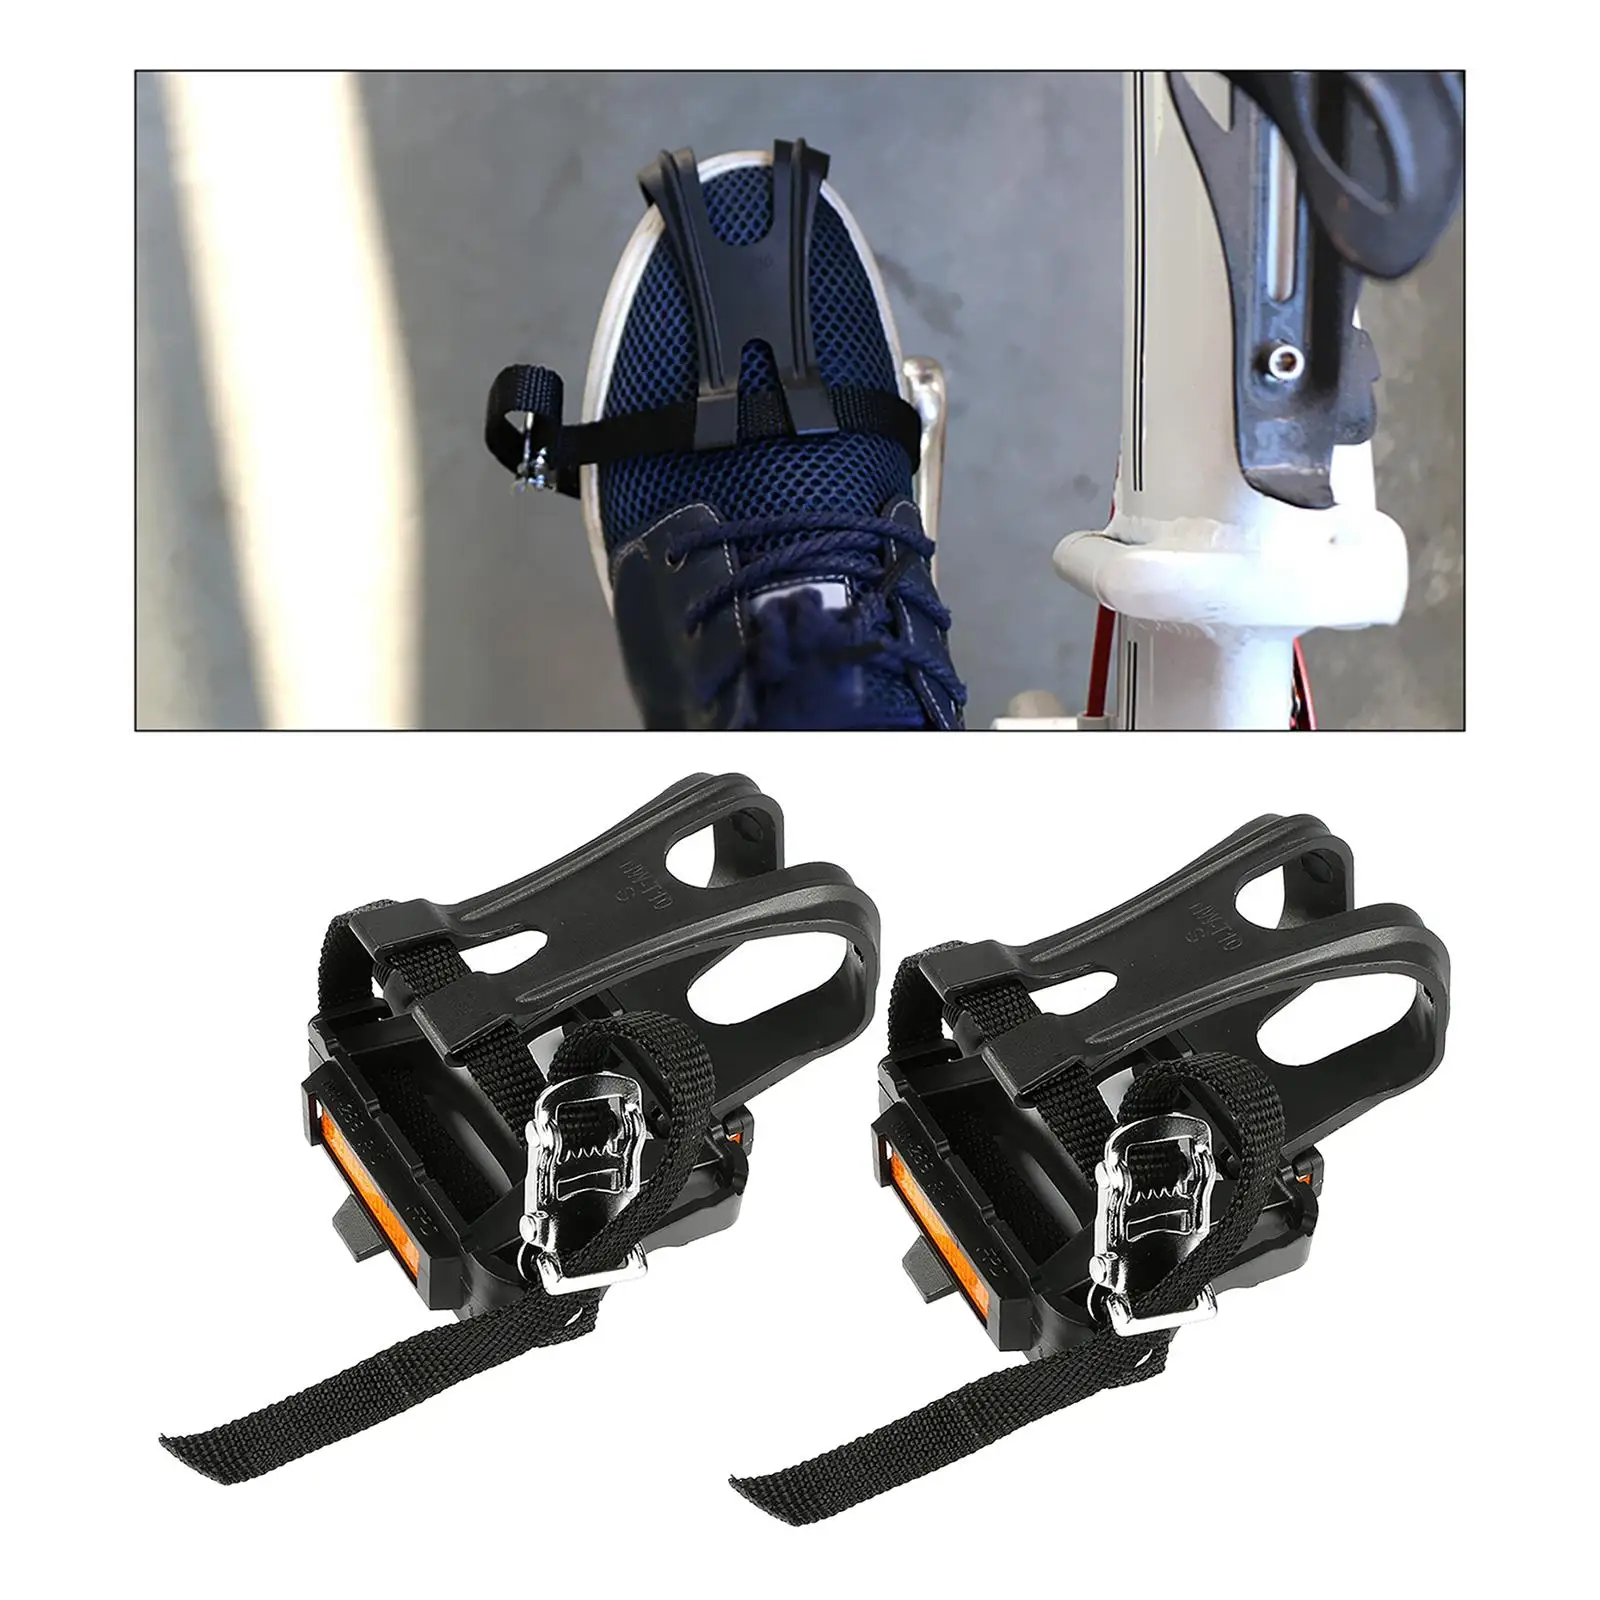 Road Bike Mountain Bike Pedal Toe Straps Clips with Strap Nylon Belts for Adults Large Fixed Cycling